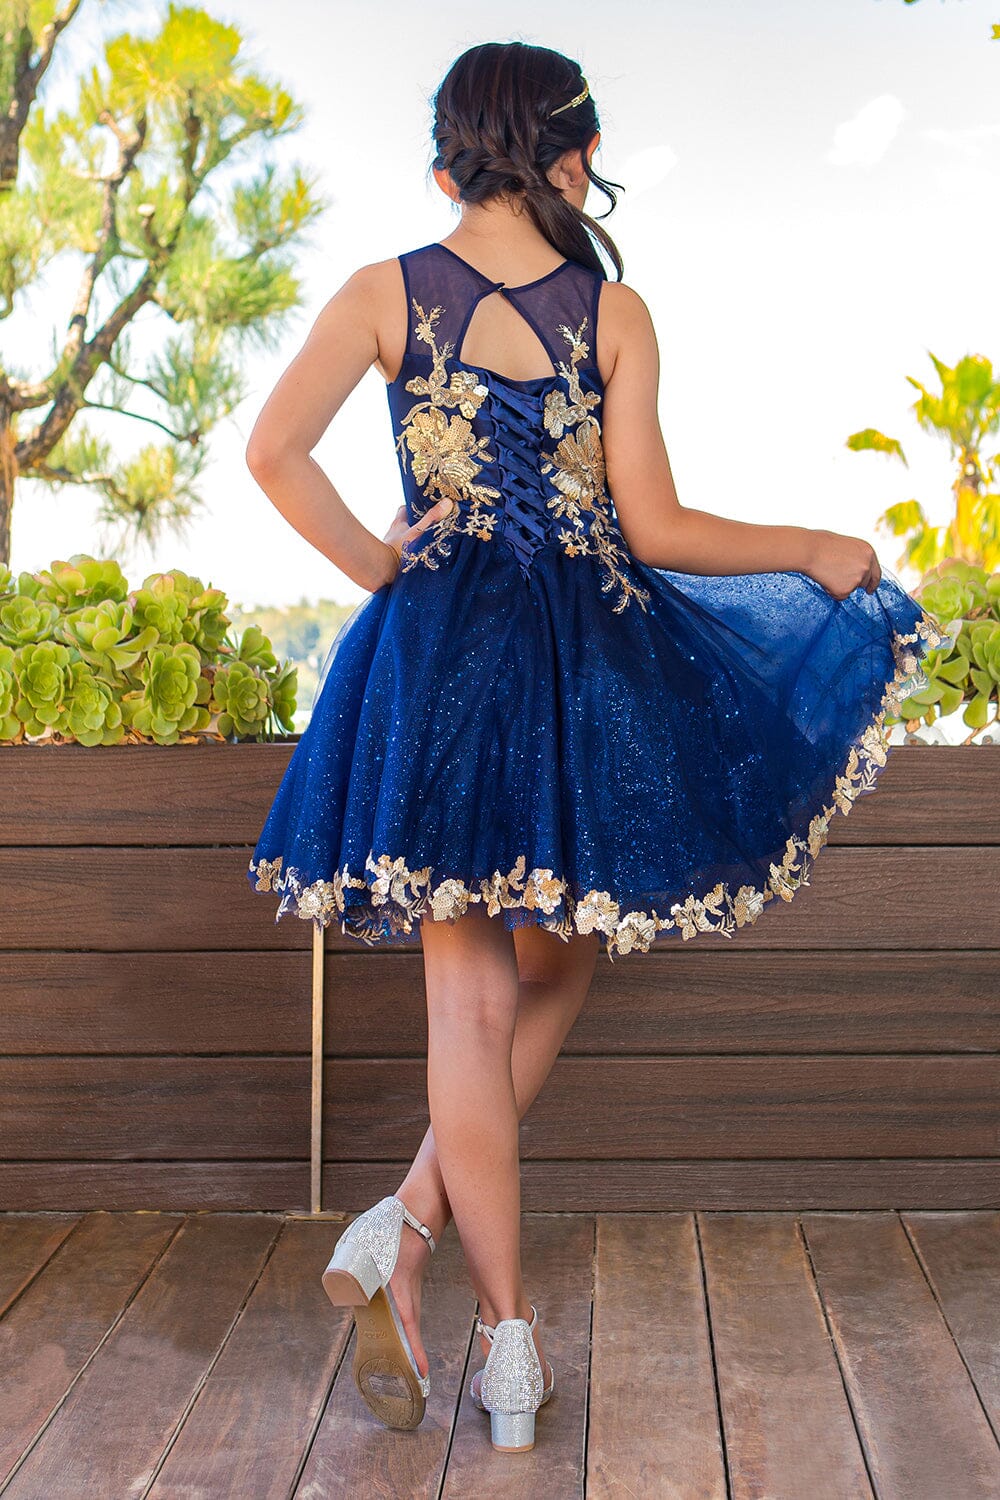 Girls Short Sequin Print Dress by Cinderella Couture 5121